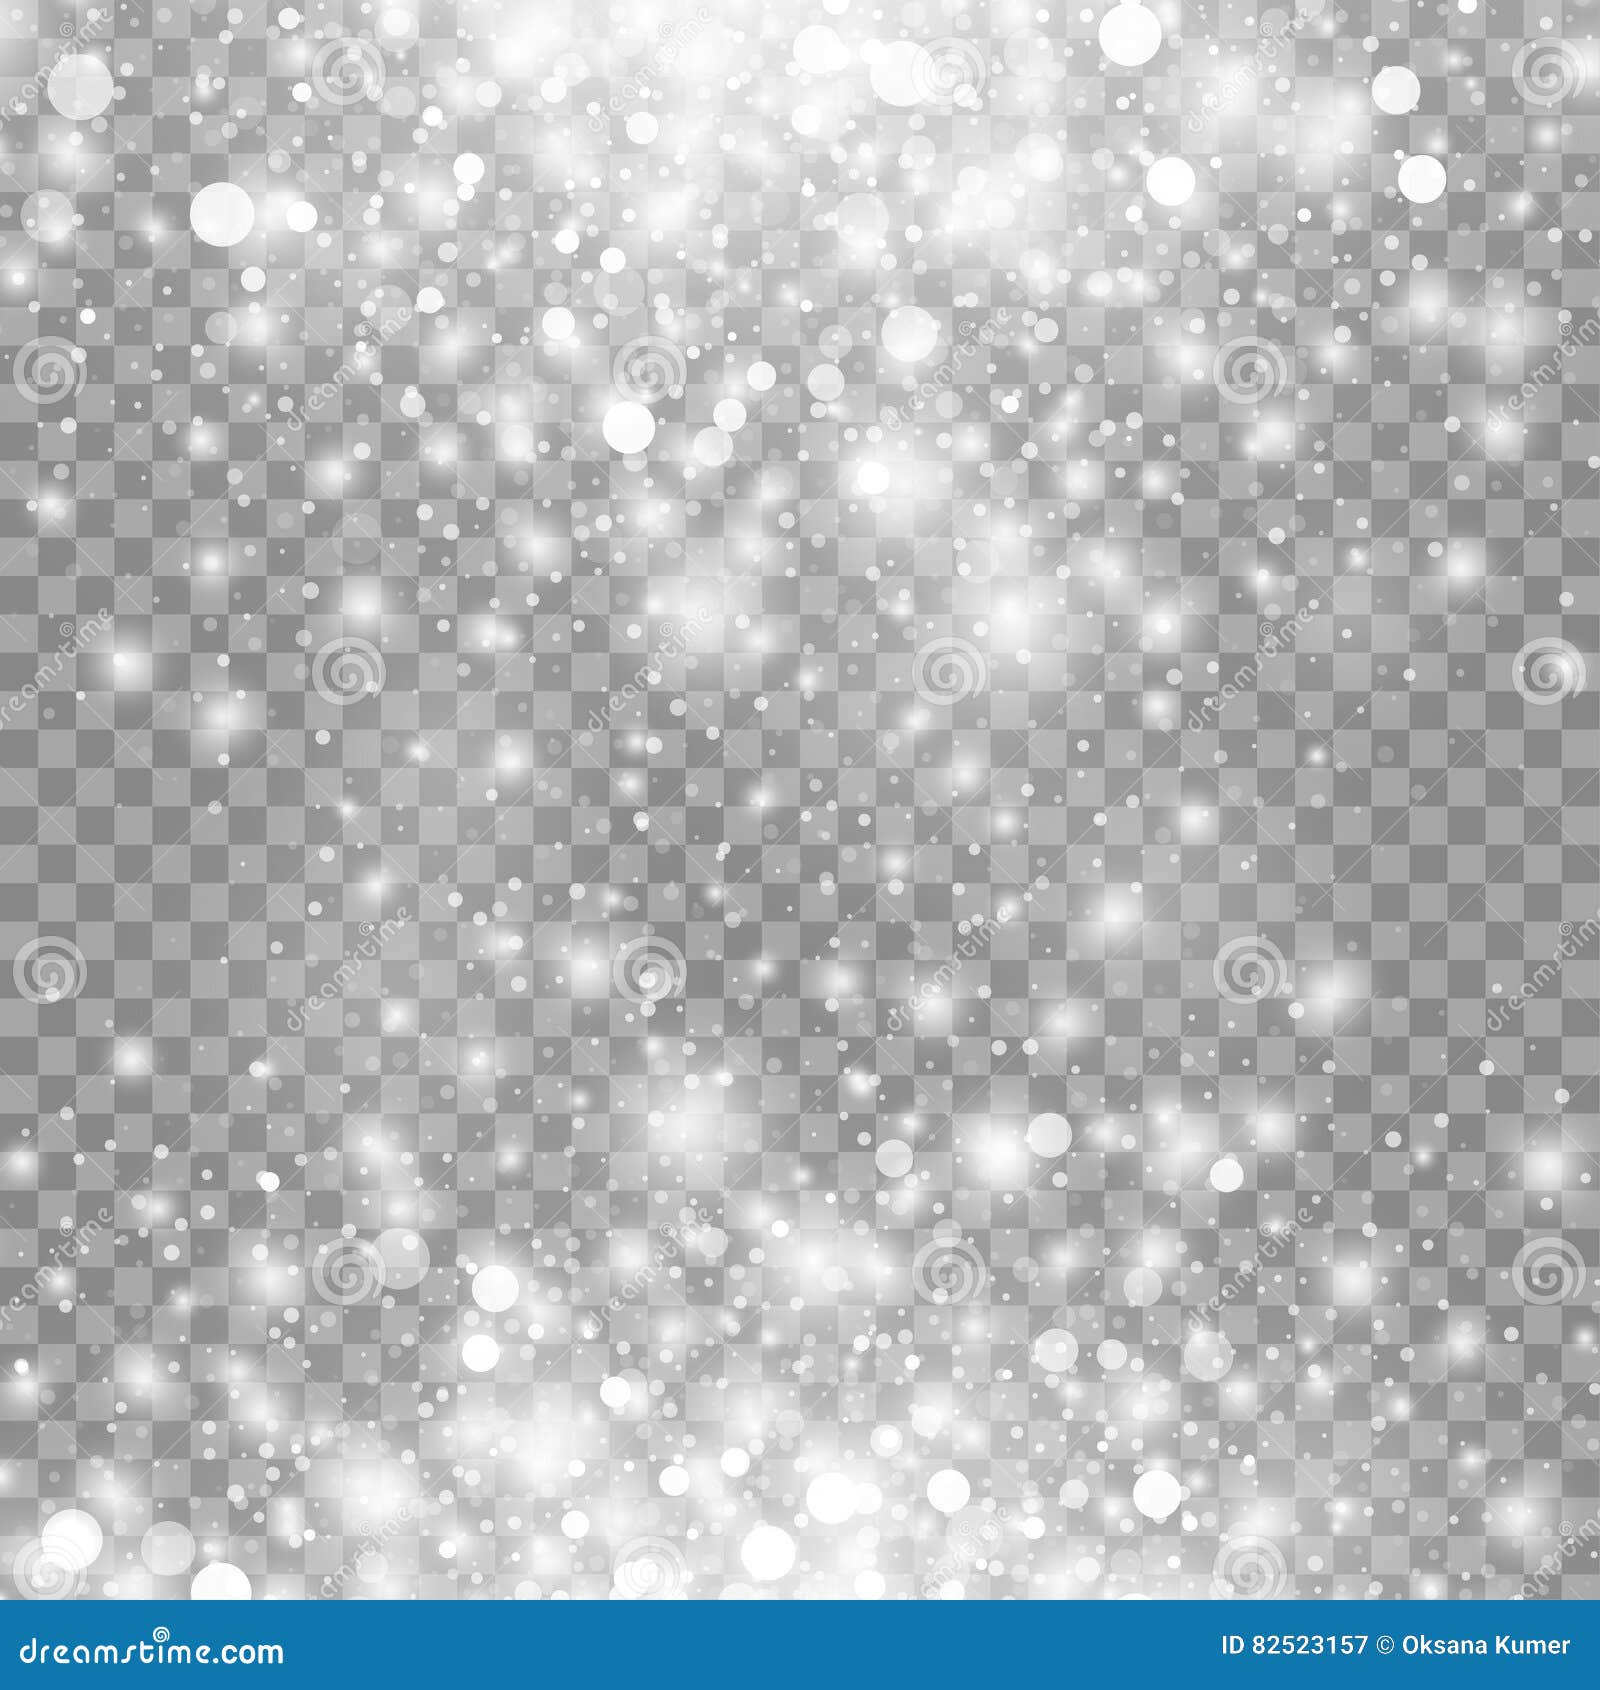 free vector magic background